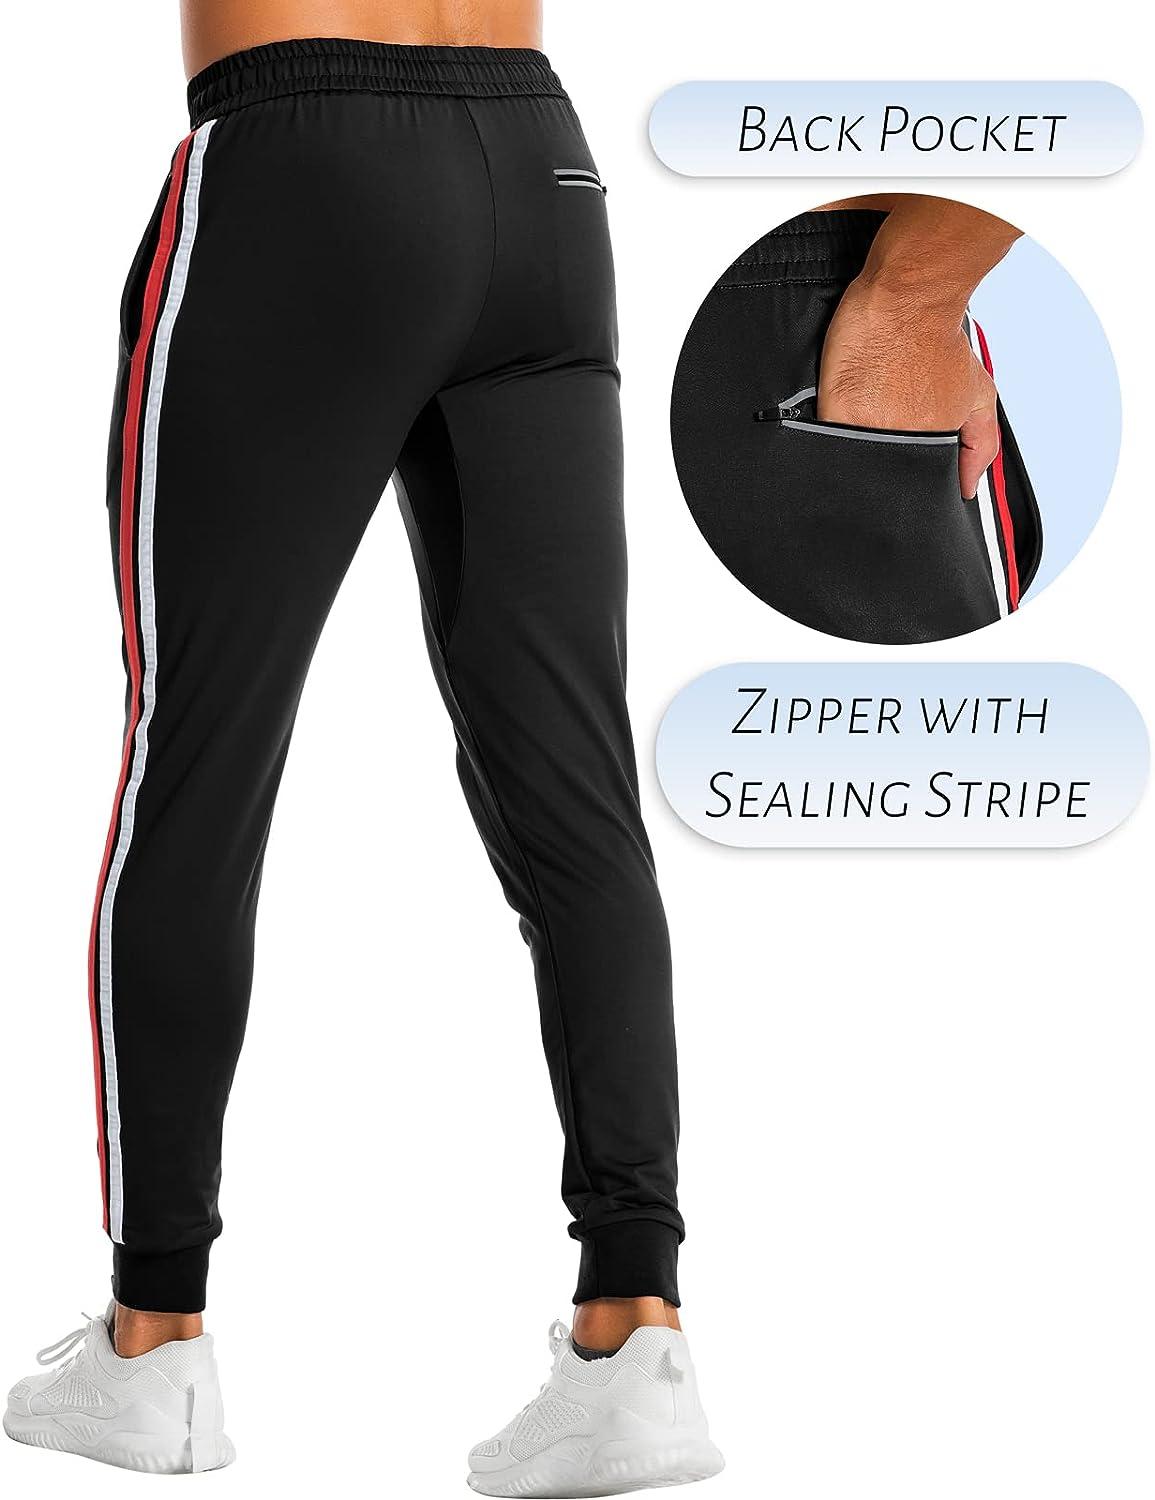 Sweatpants Women Leggings Pocket Sports Pants Yoga Women Workout Out  Running Athletic Fitness Joggers for Women